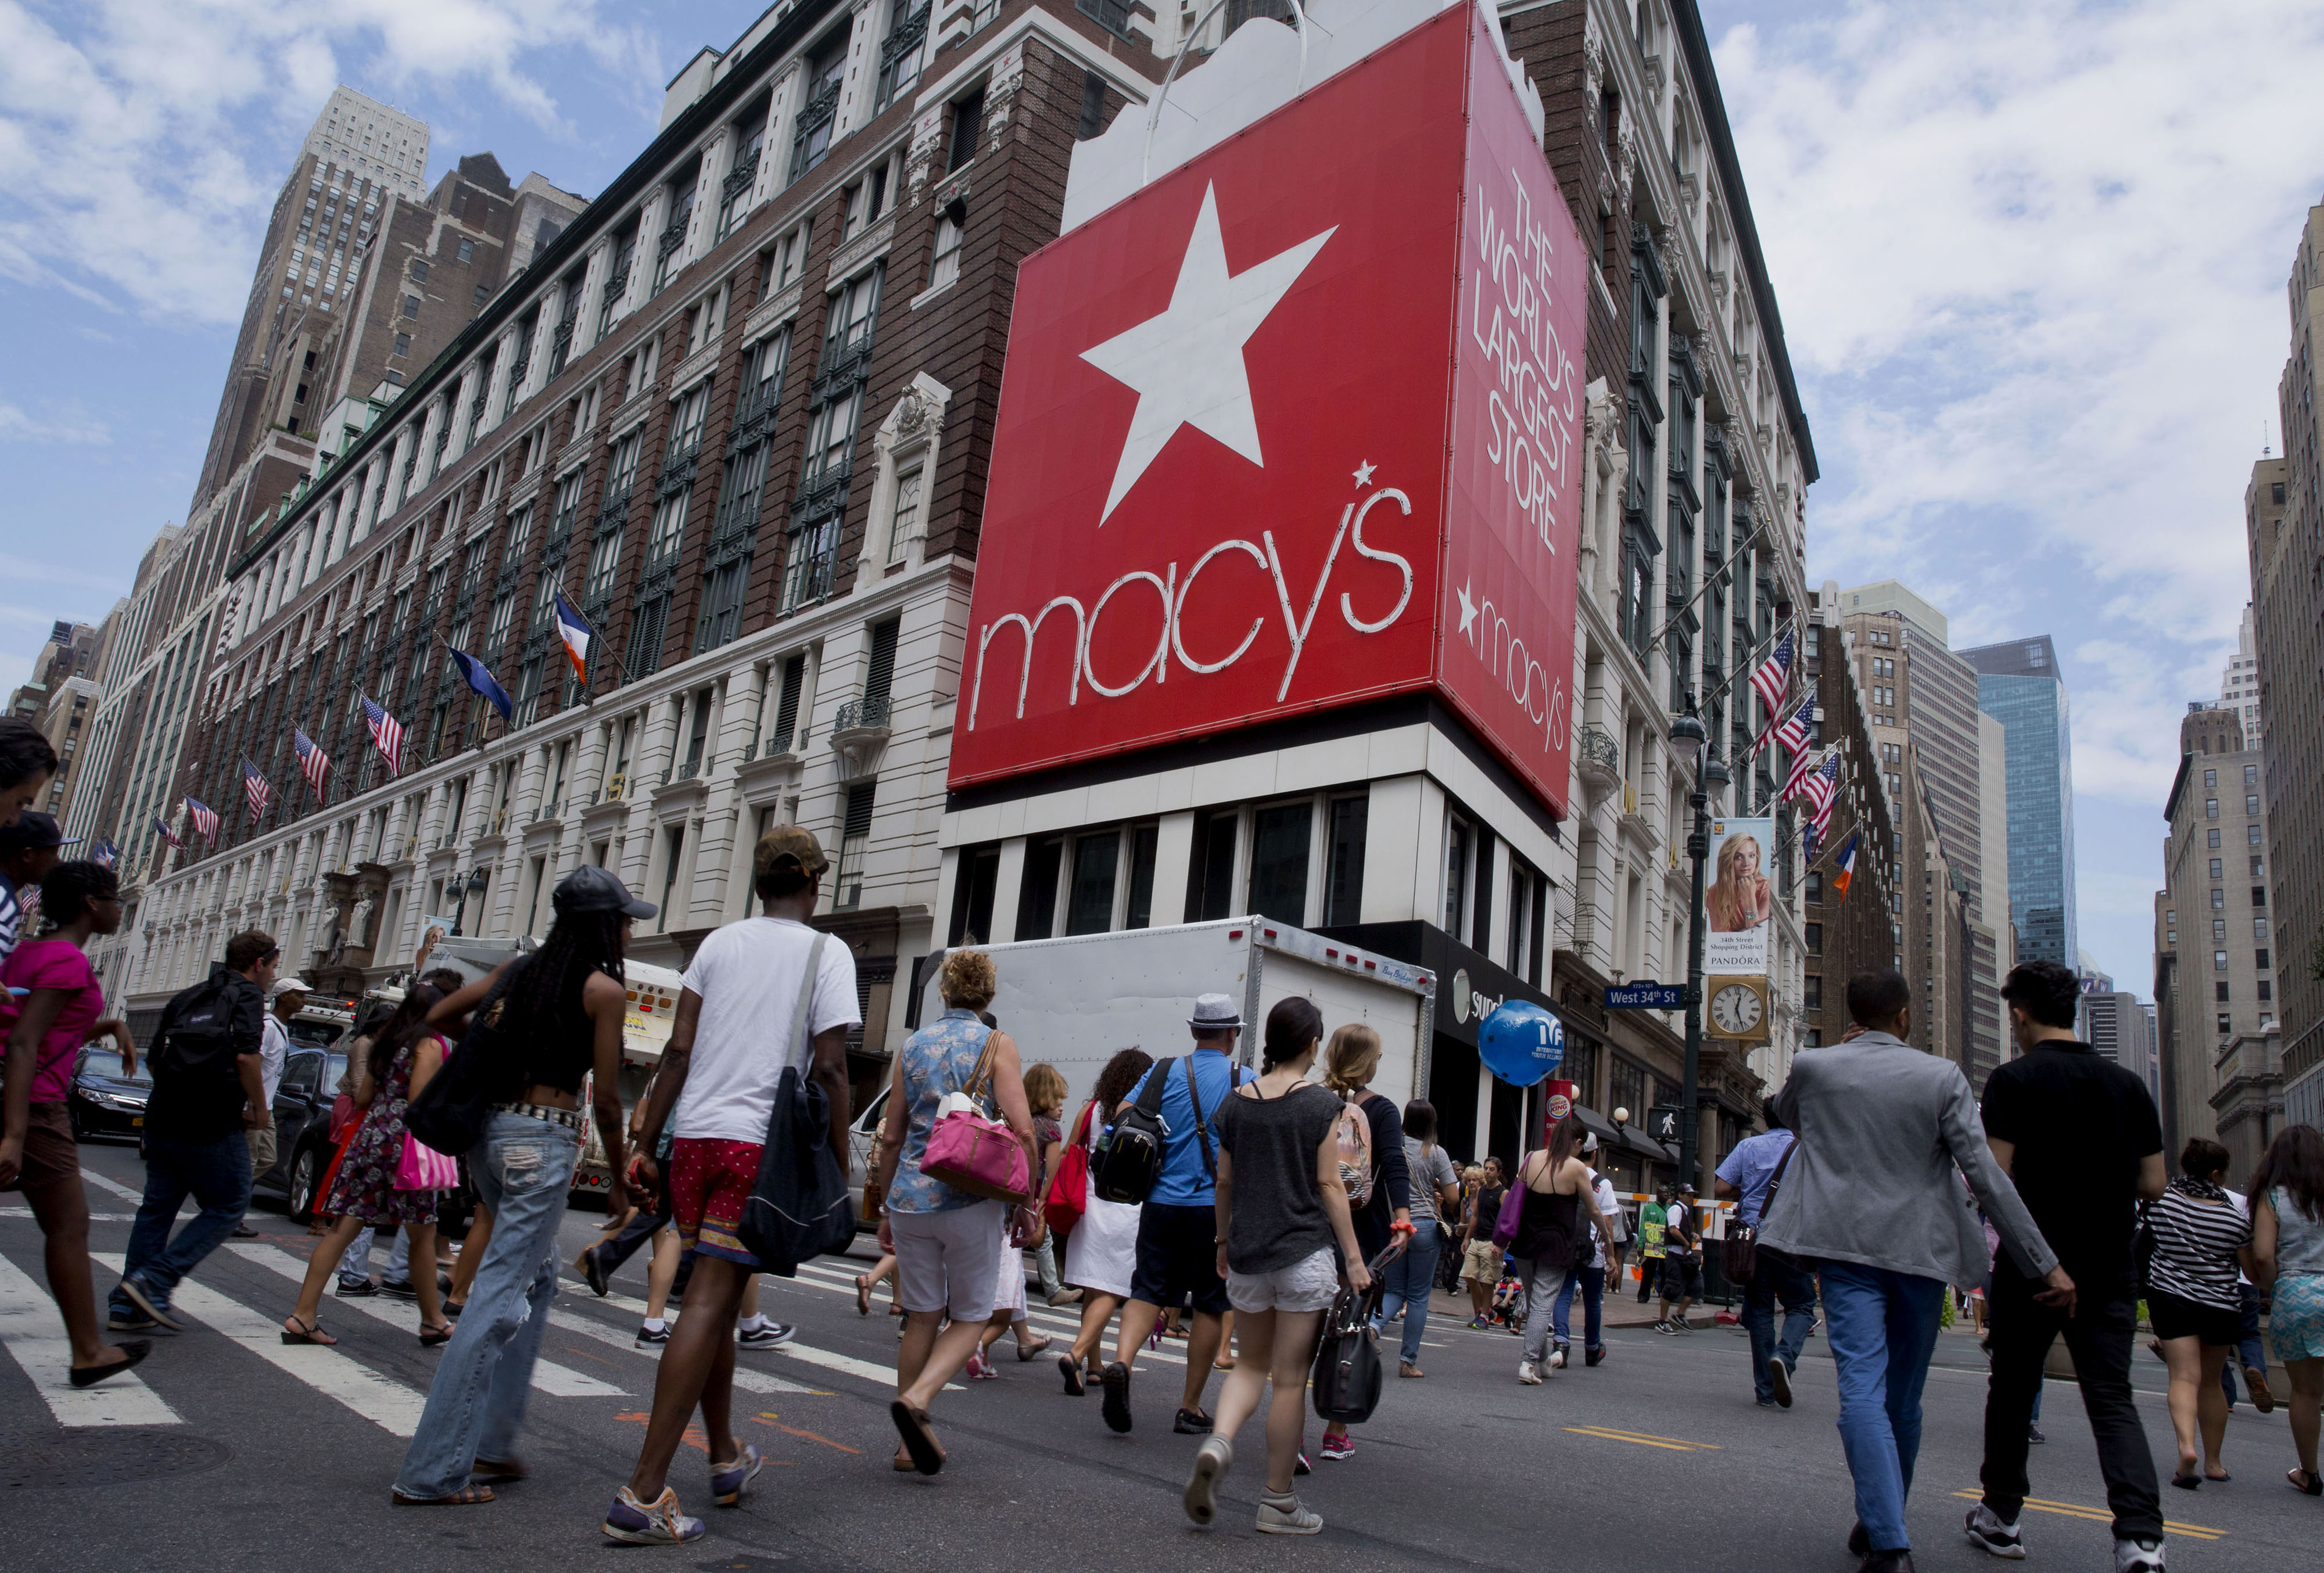 Pedestrians cross the street in front of the Macy's Inc. flagship store in New York City on Aug. 6, 2014. (Bloomberg—Bloomberg via Getty Images)